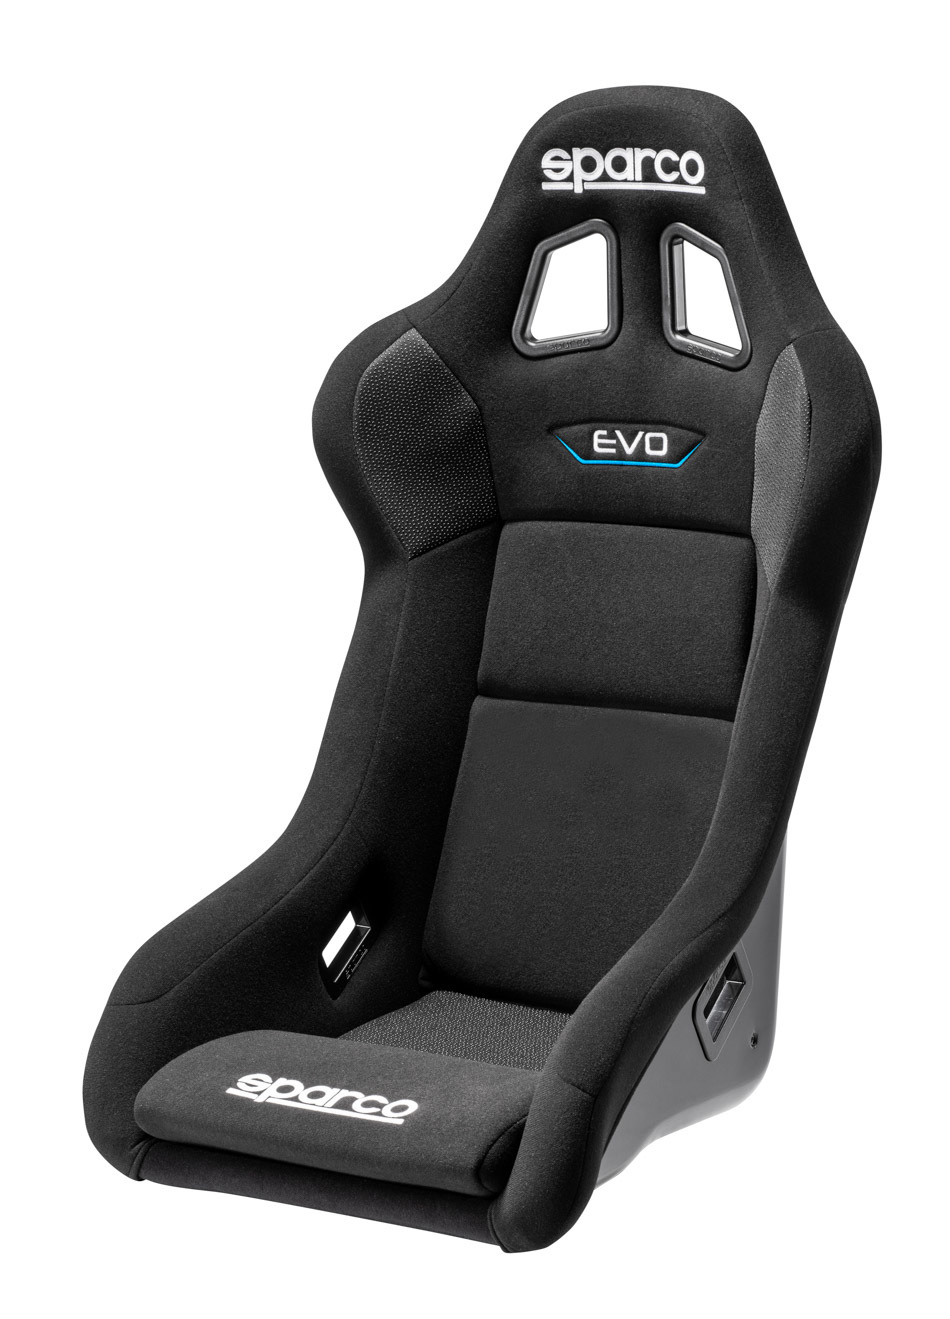 Sparco 008007RNR - Seat, EVO QRt, Non-Reclining, FIA Approved, Side Bolsters, Harness Openings, Fiberglass Composite, Fire-Retardant Non-Slip Fabric, Black, Each